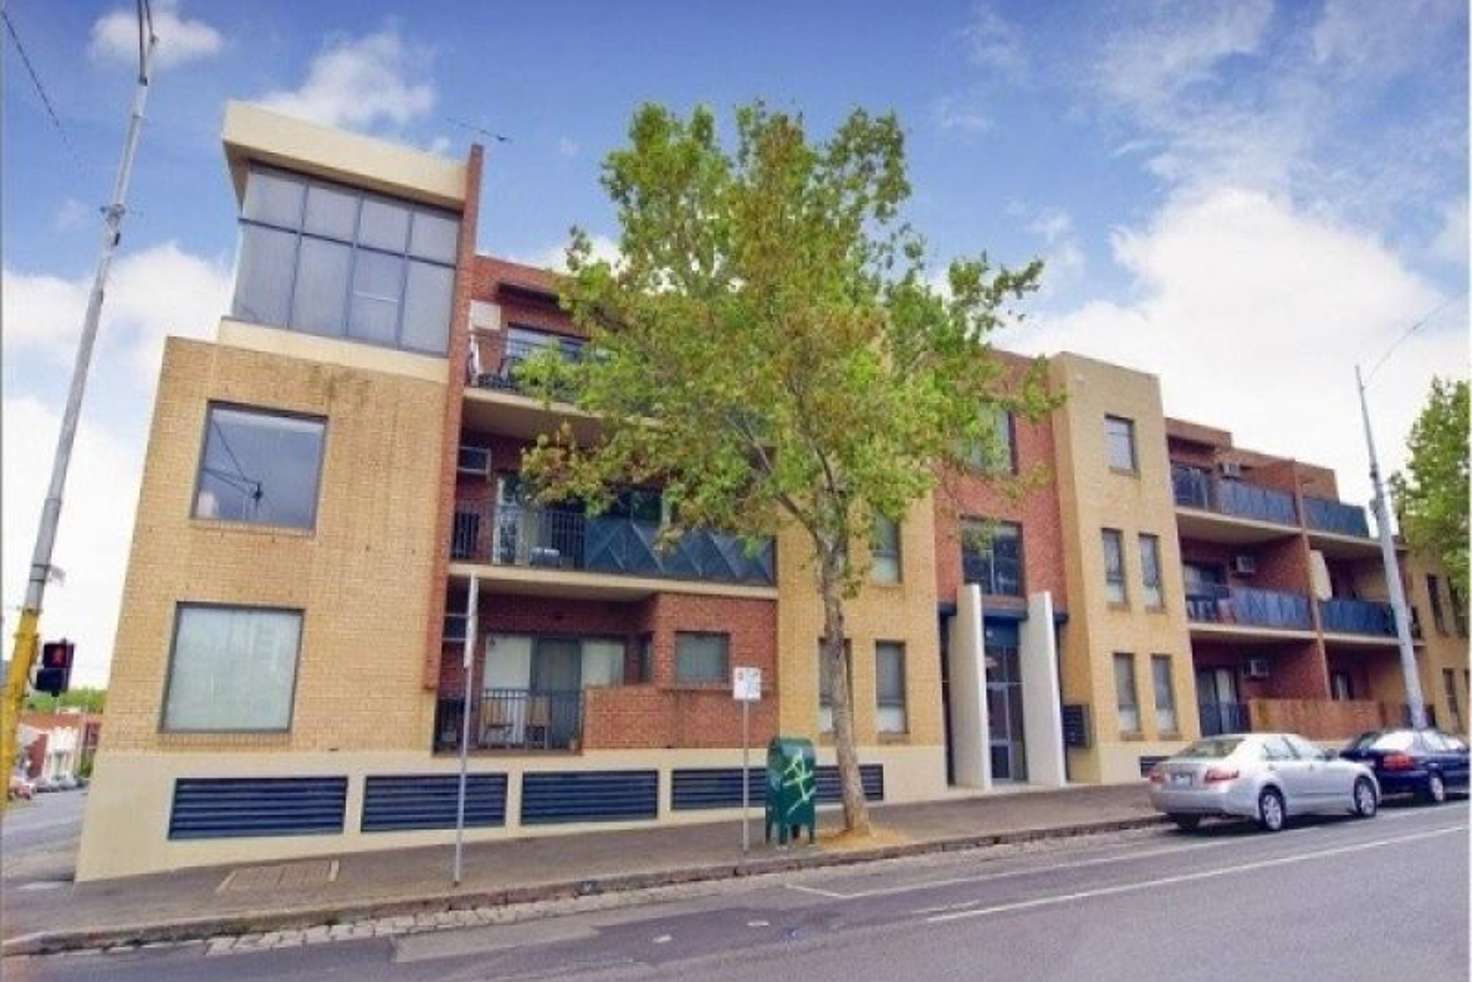 Main view of Homely apartment listing, 700 Queensberry Street, North Melbourne VIC 3051